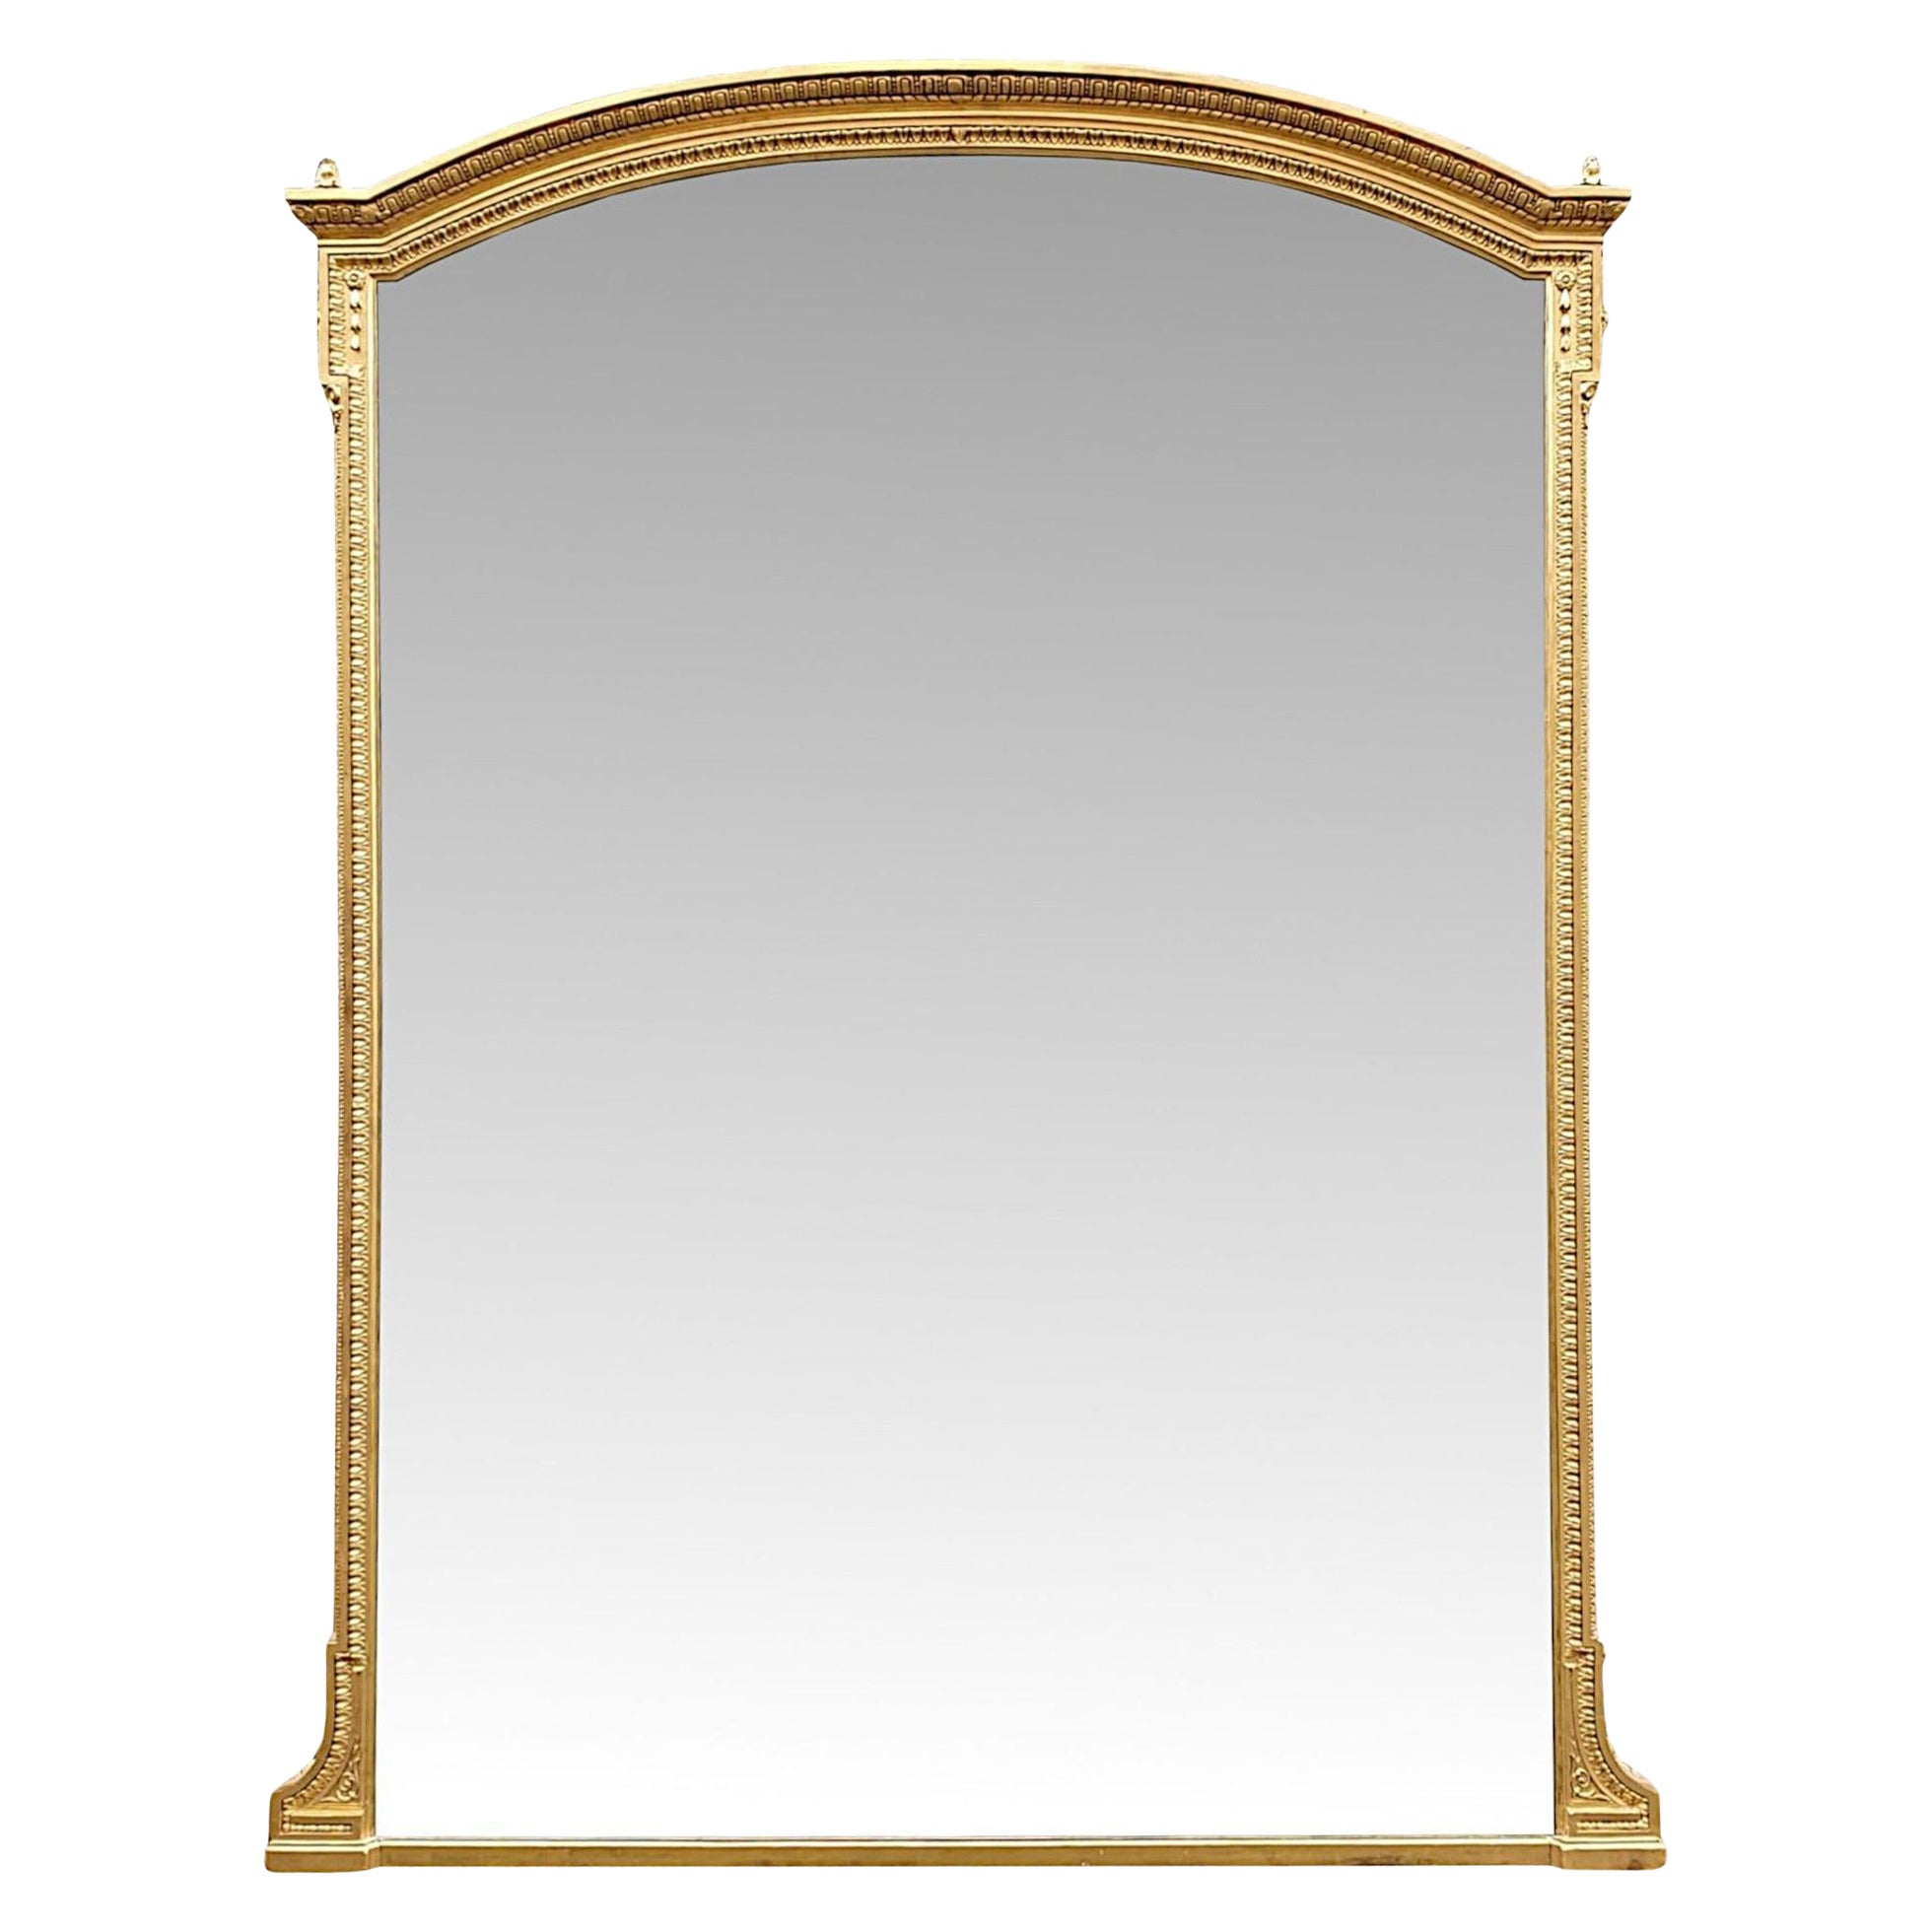 Very Fine and Rare 19th Century Overmantle Mirror by John Taylor & Son’s For Sale